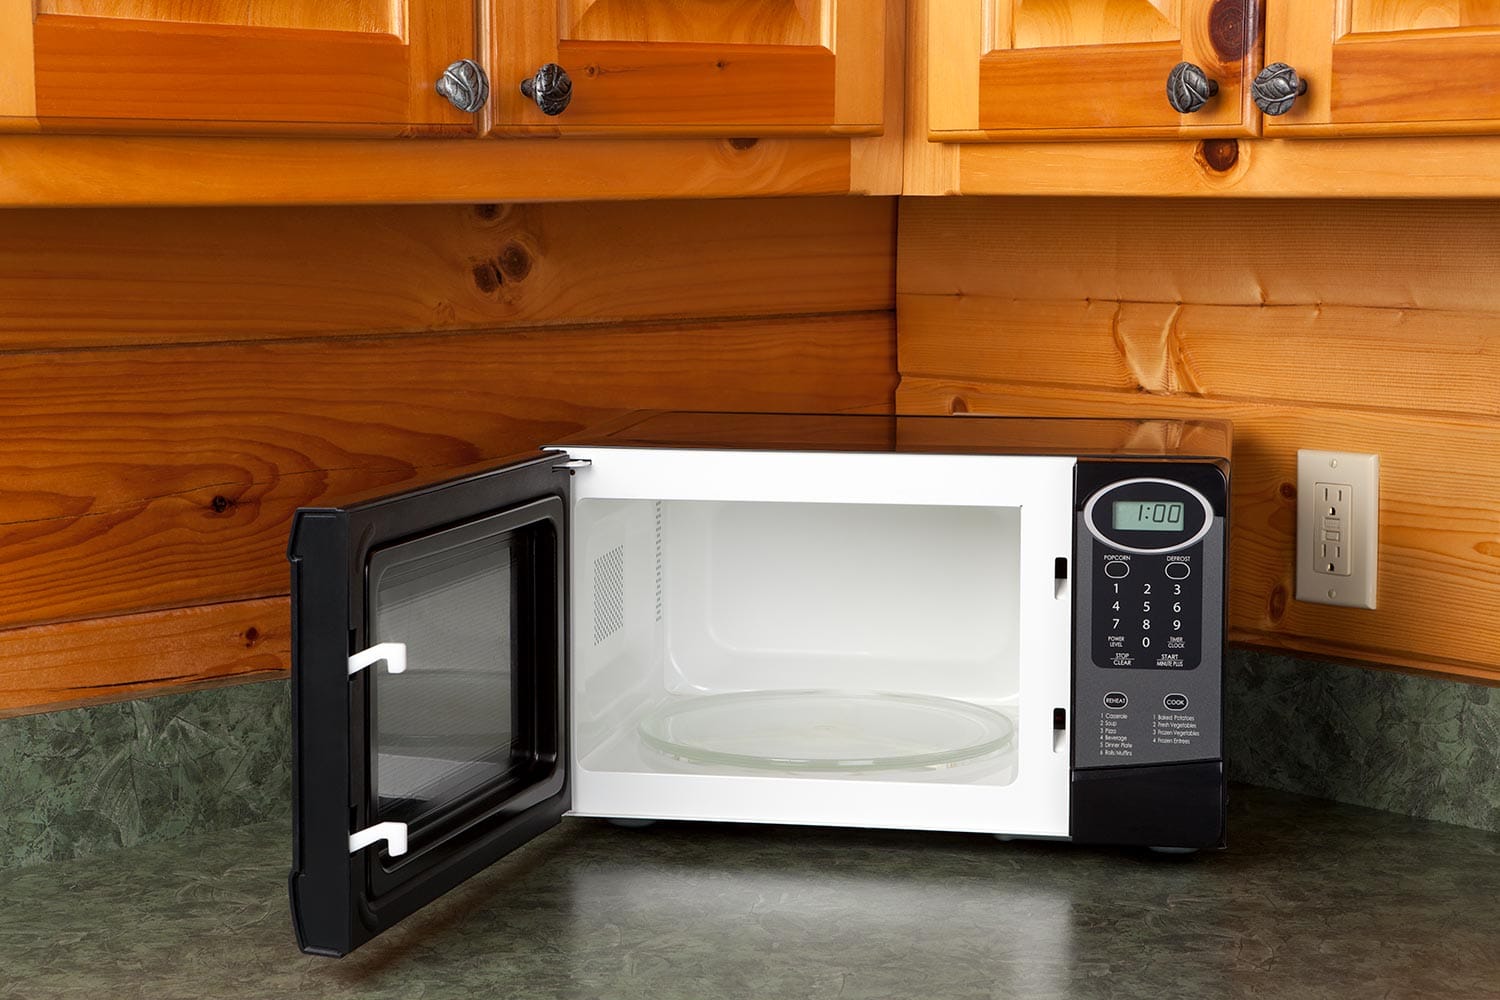 Open microwave oven on a kitchen counter in a log home